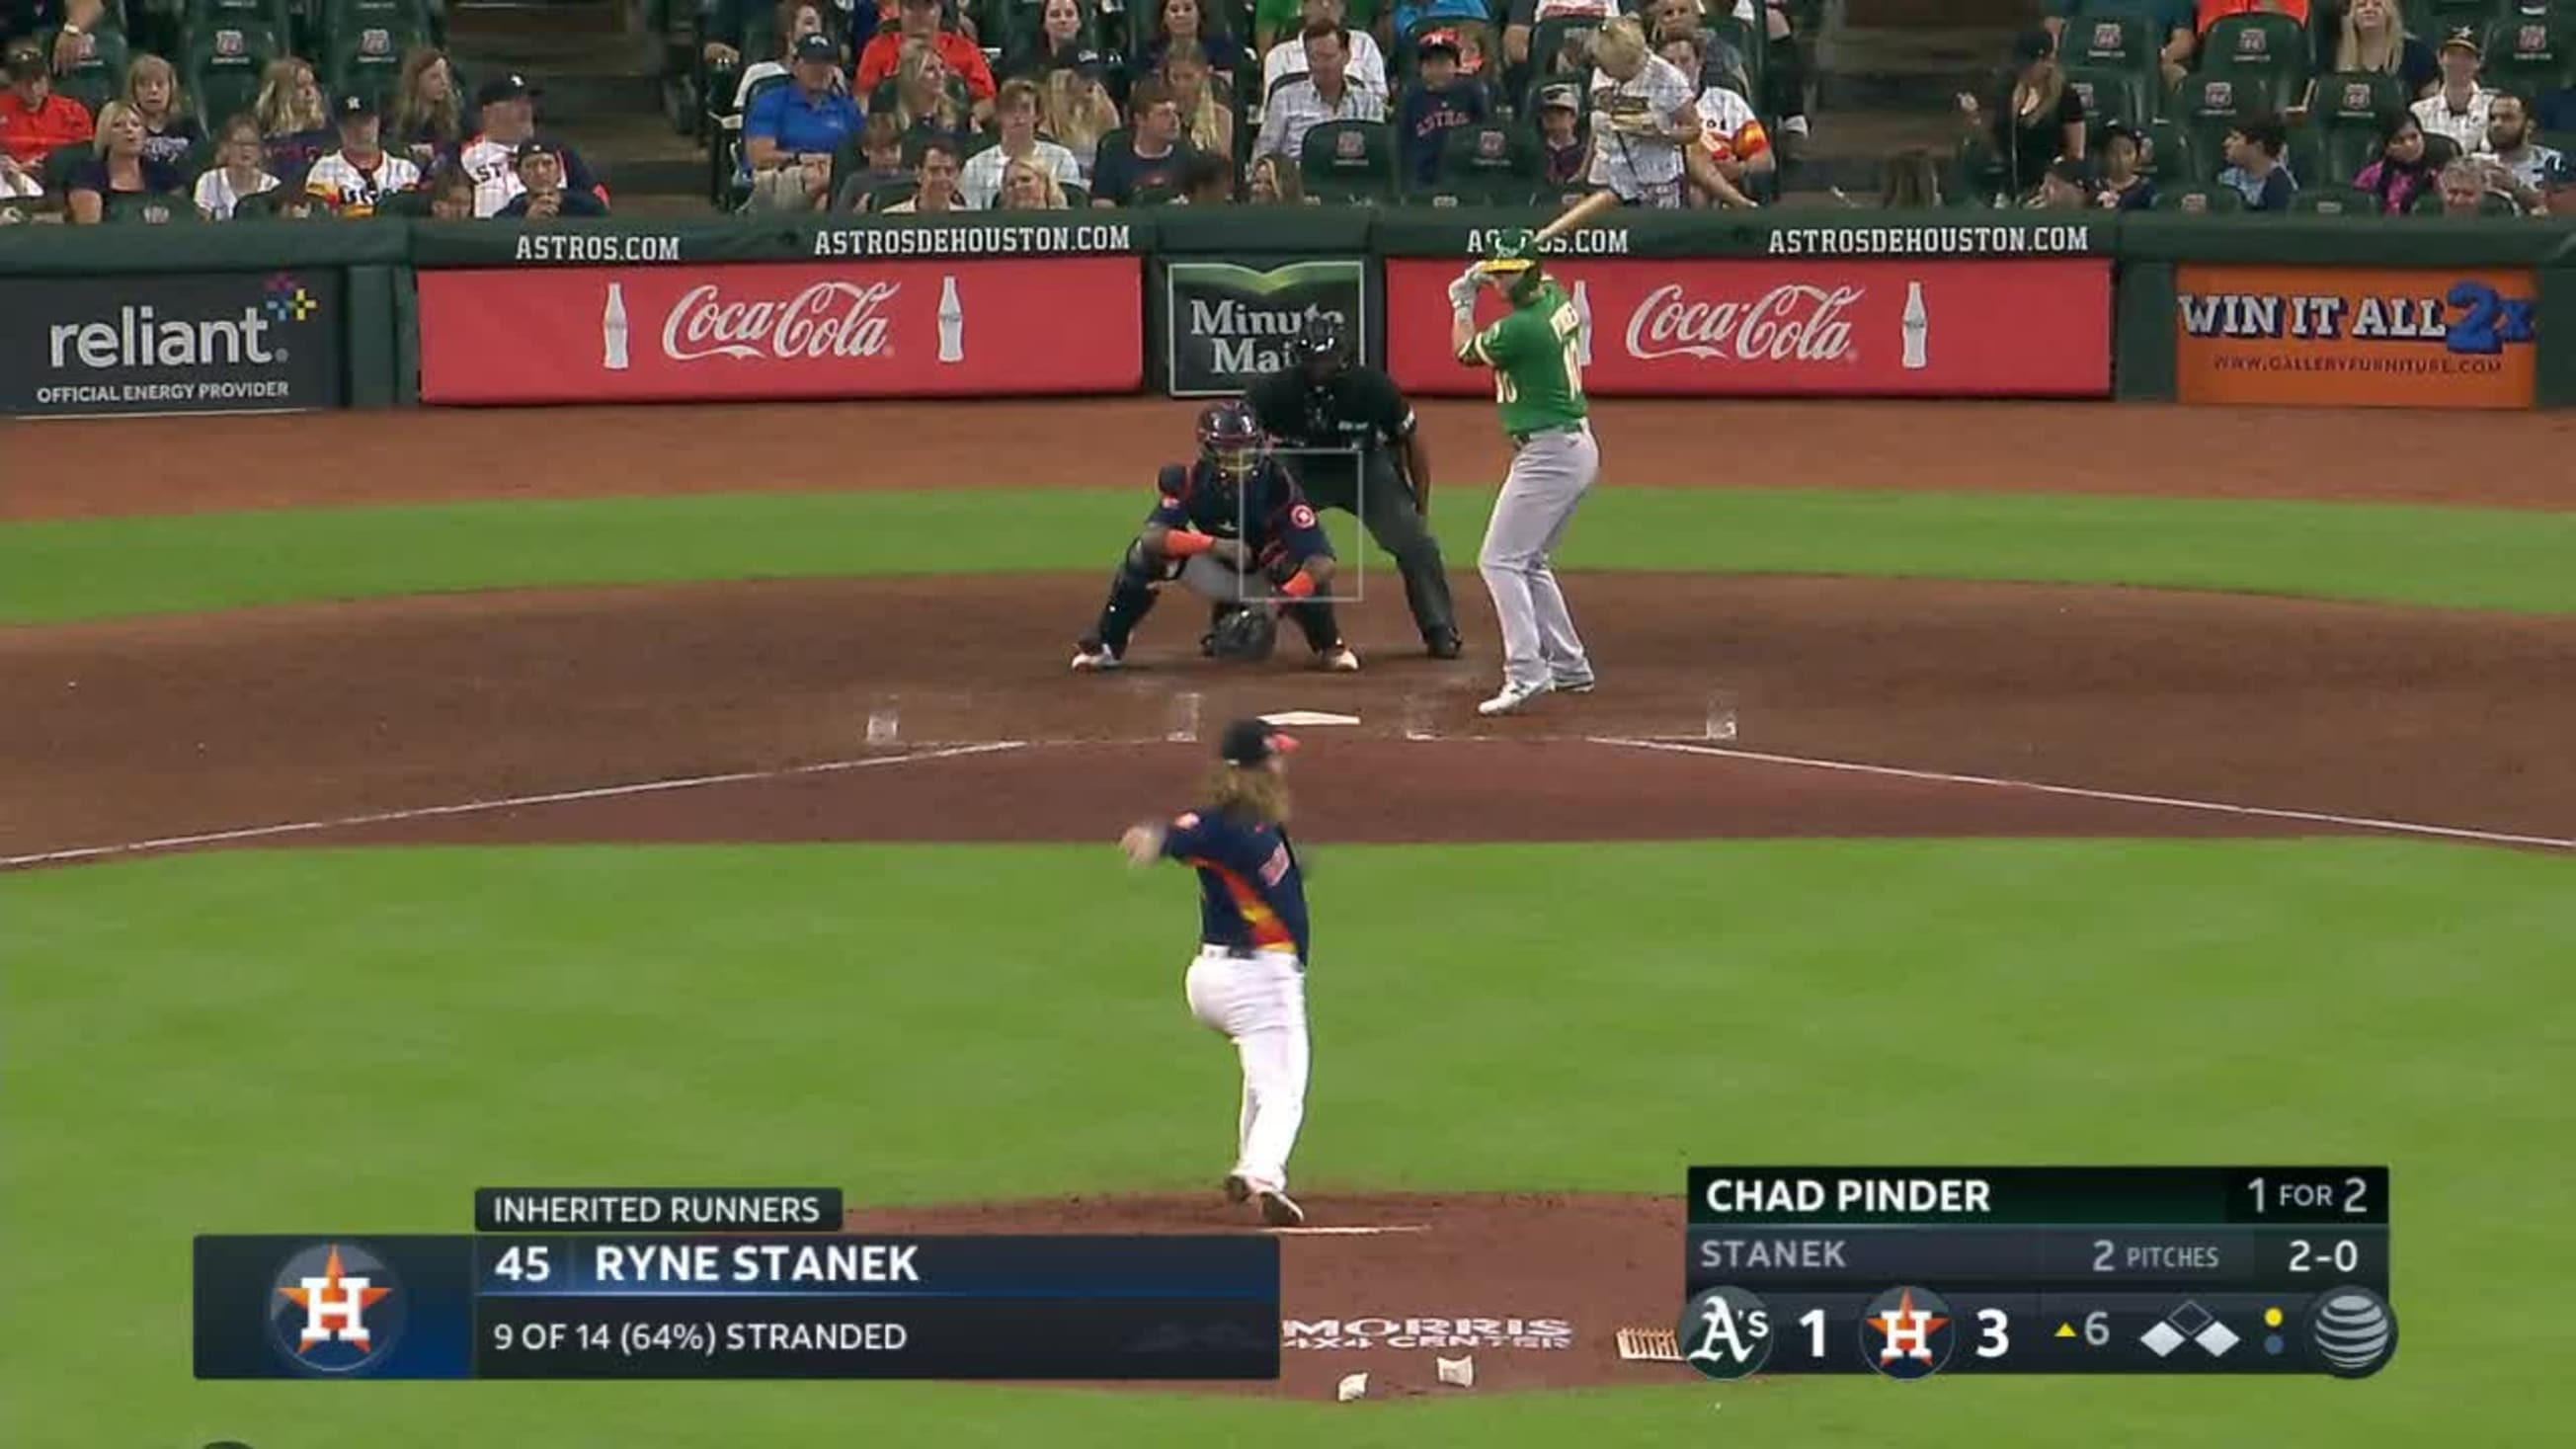 Chad Pinder doubles of Minute Maid Park roof